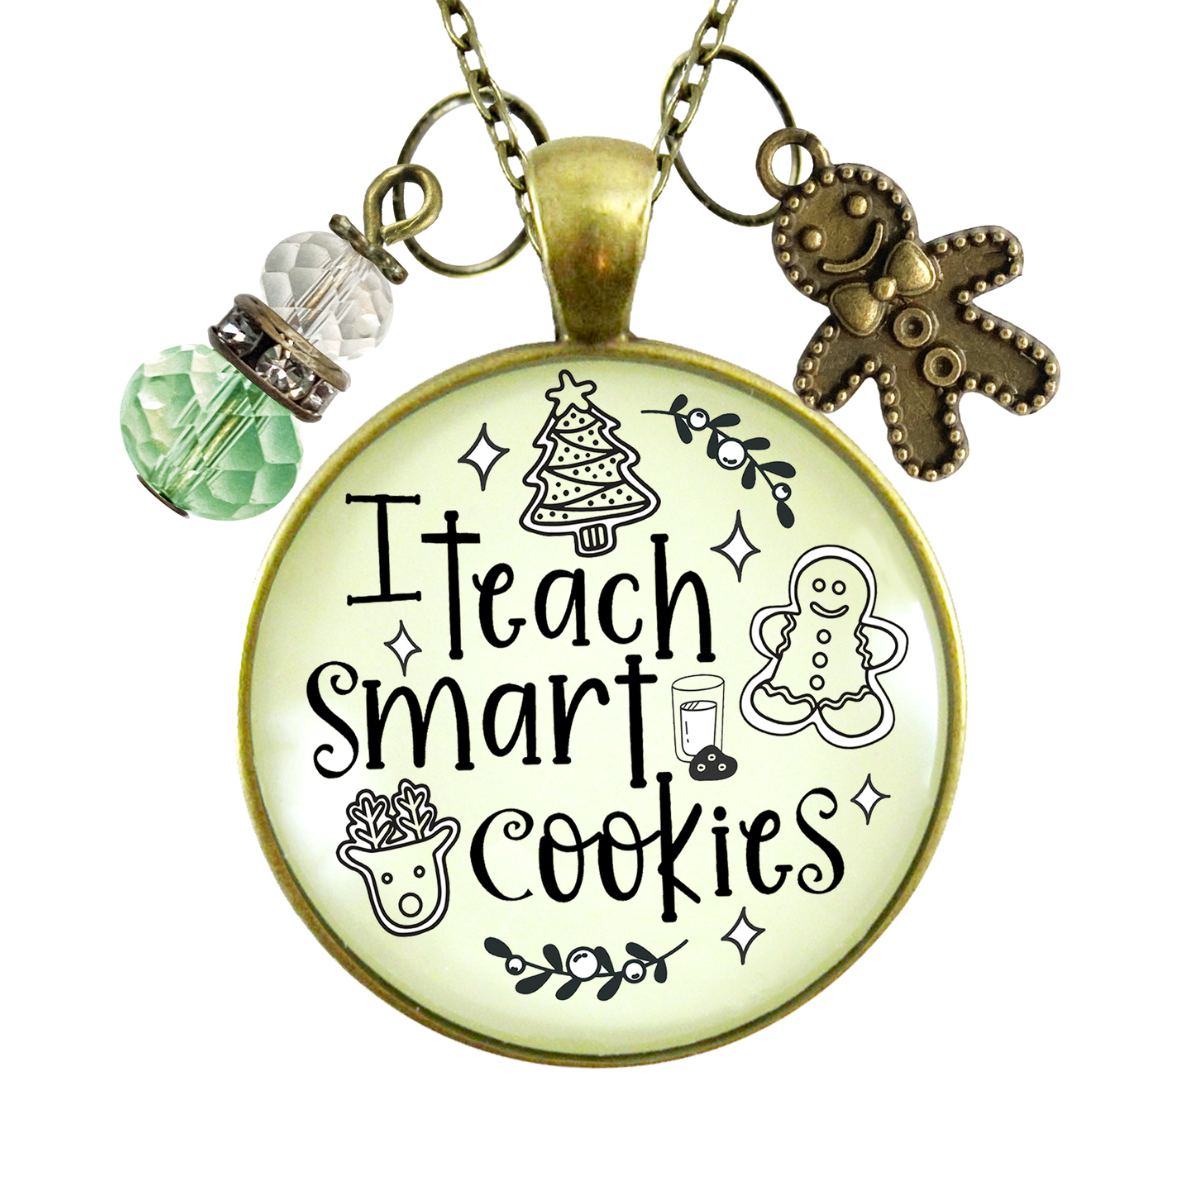 Happy Holidays Teacher Necklace I Teach Smart Cookies Gingerbread Charm Christmas Gift From Student Jewelry  Necklace - Gutsy Goodness Handmade Jewelry